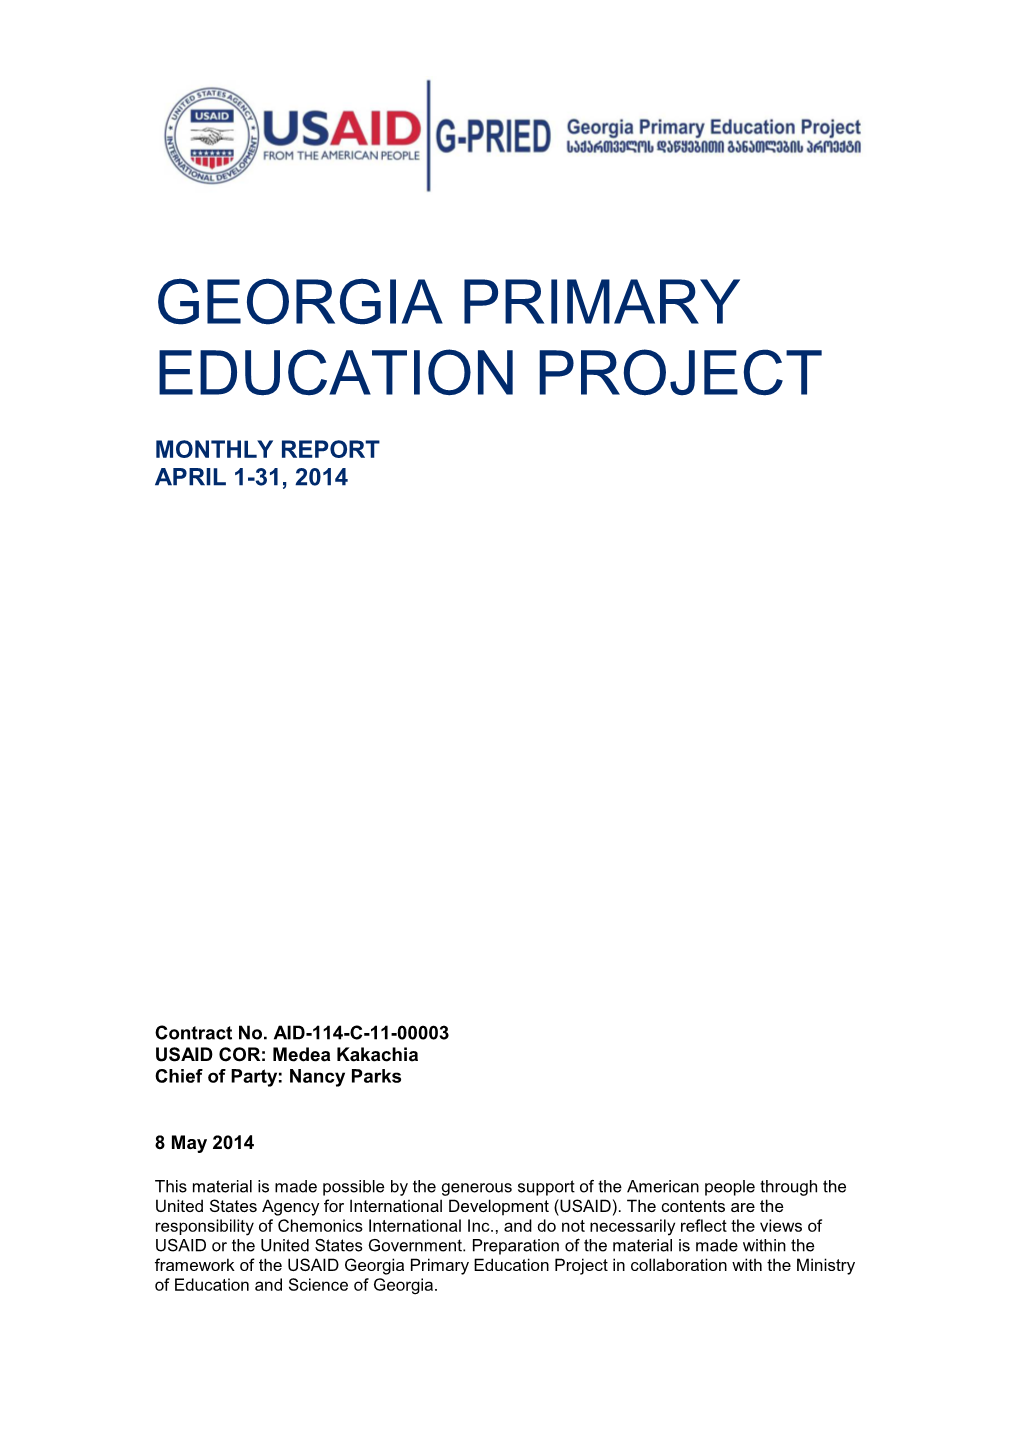 Georgia Primary Education Project in Collaboration with the Ministry of Education and Science of Georgia